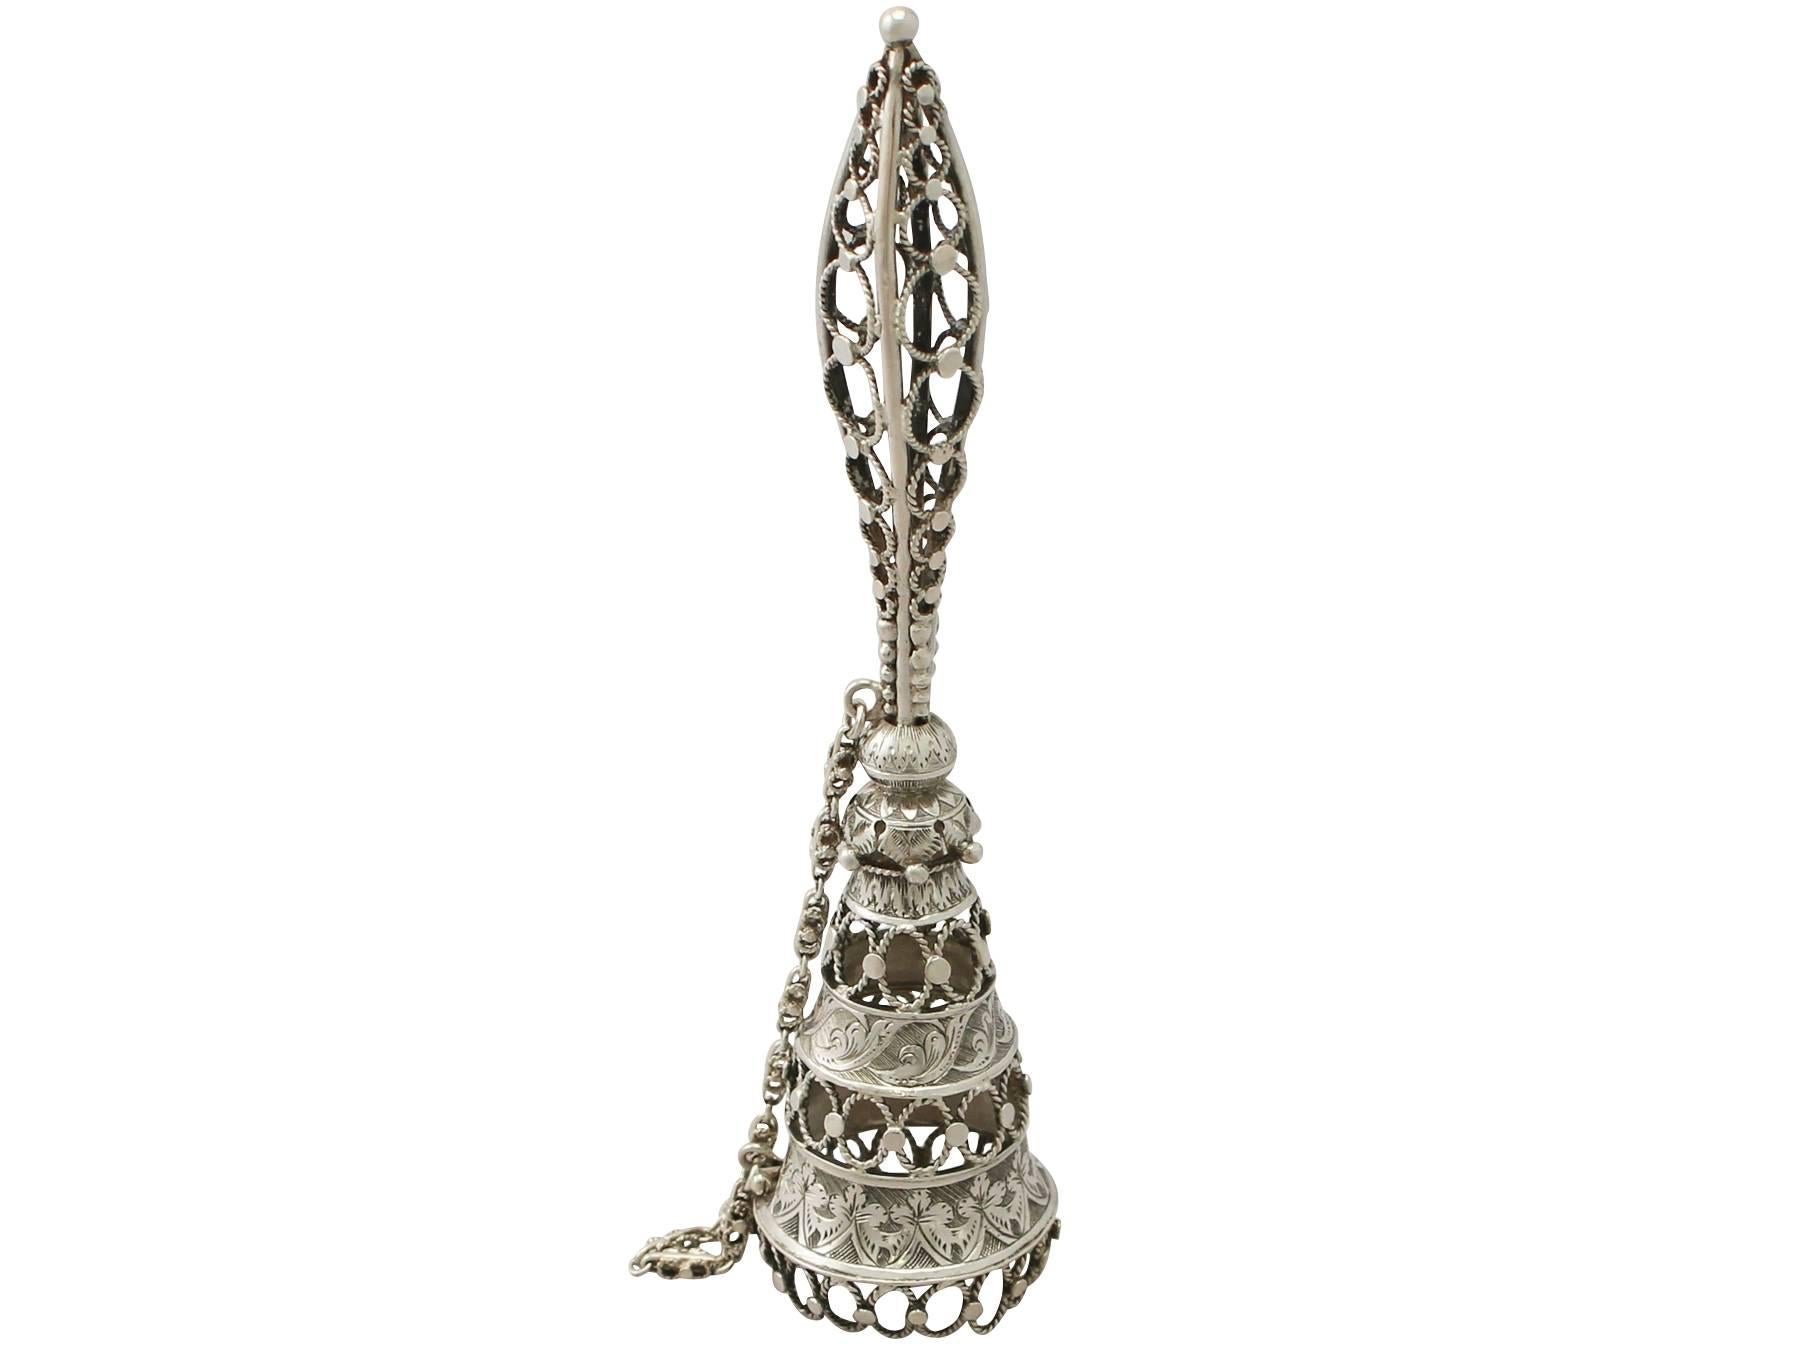 An exceptional, fine and impressive antique Victorian English sterling silver posy holder; an addition to our ornamental silverware collection.

This exceptional antique Victorian sterling silver posy holder has a conical shaped form.

The